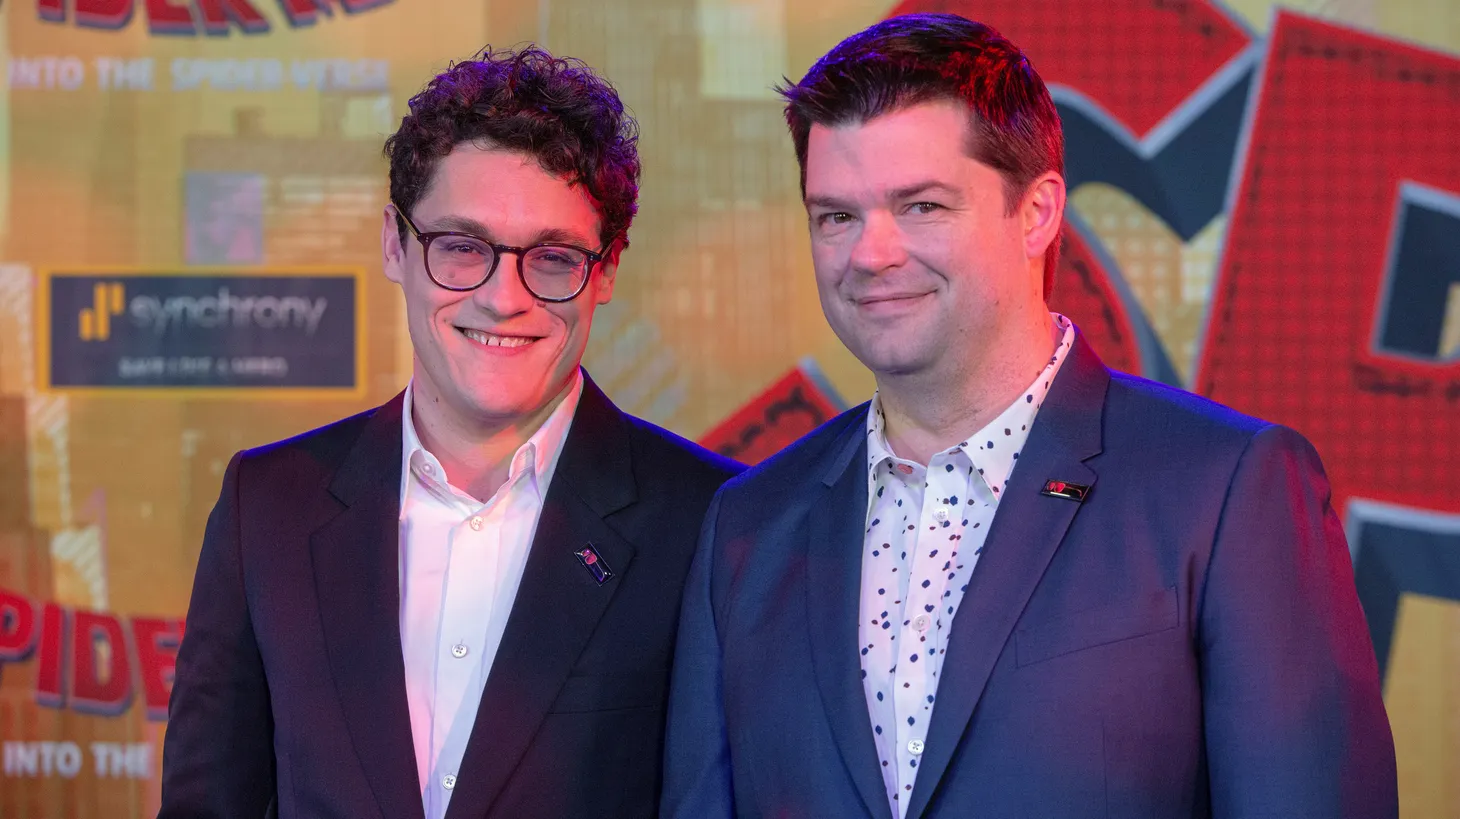 Phil Lord and Chris Miller attend the world premiere for “Spider-Man: Into the Spider-Verse” in 2018. They went on to win an Oscar for producing the animated hit.